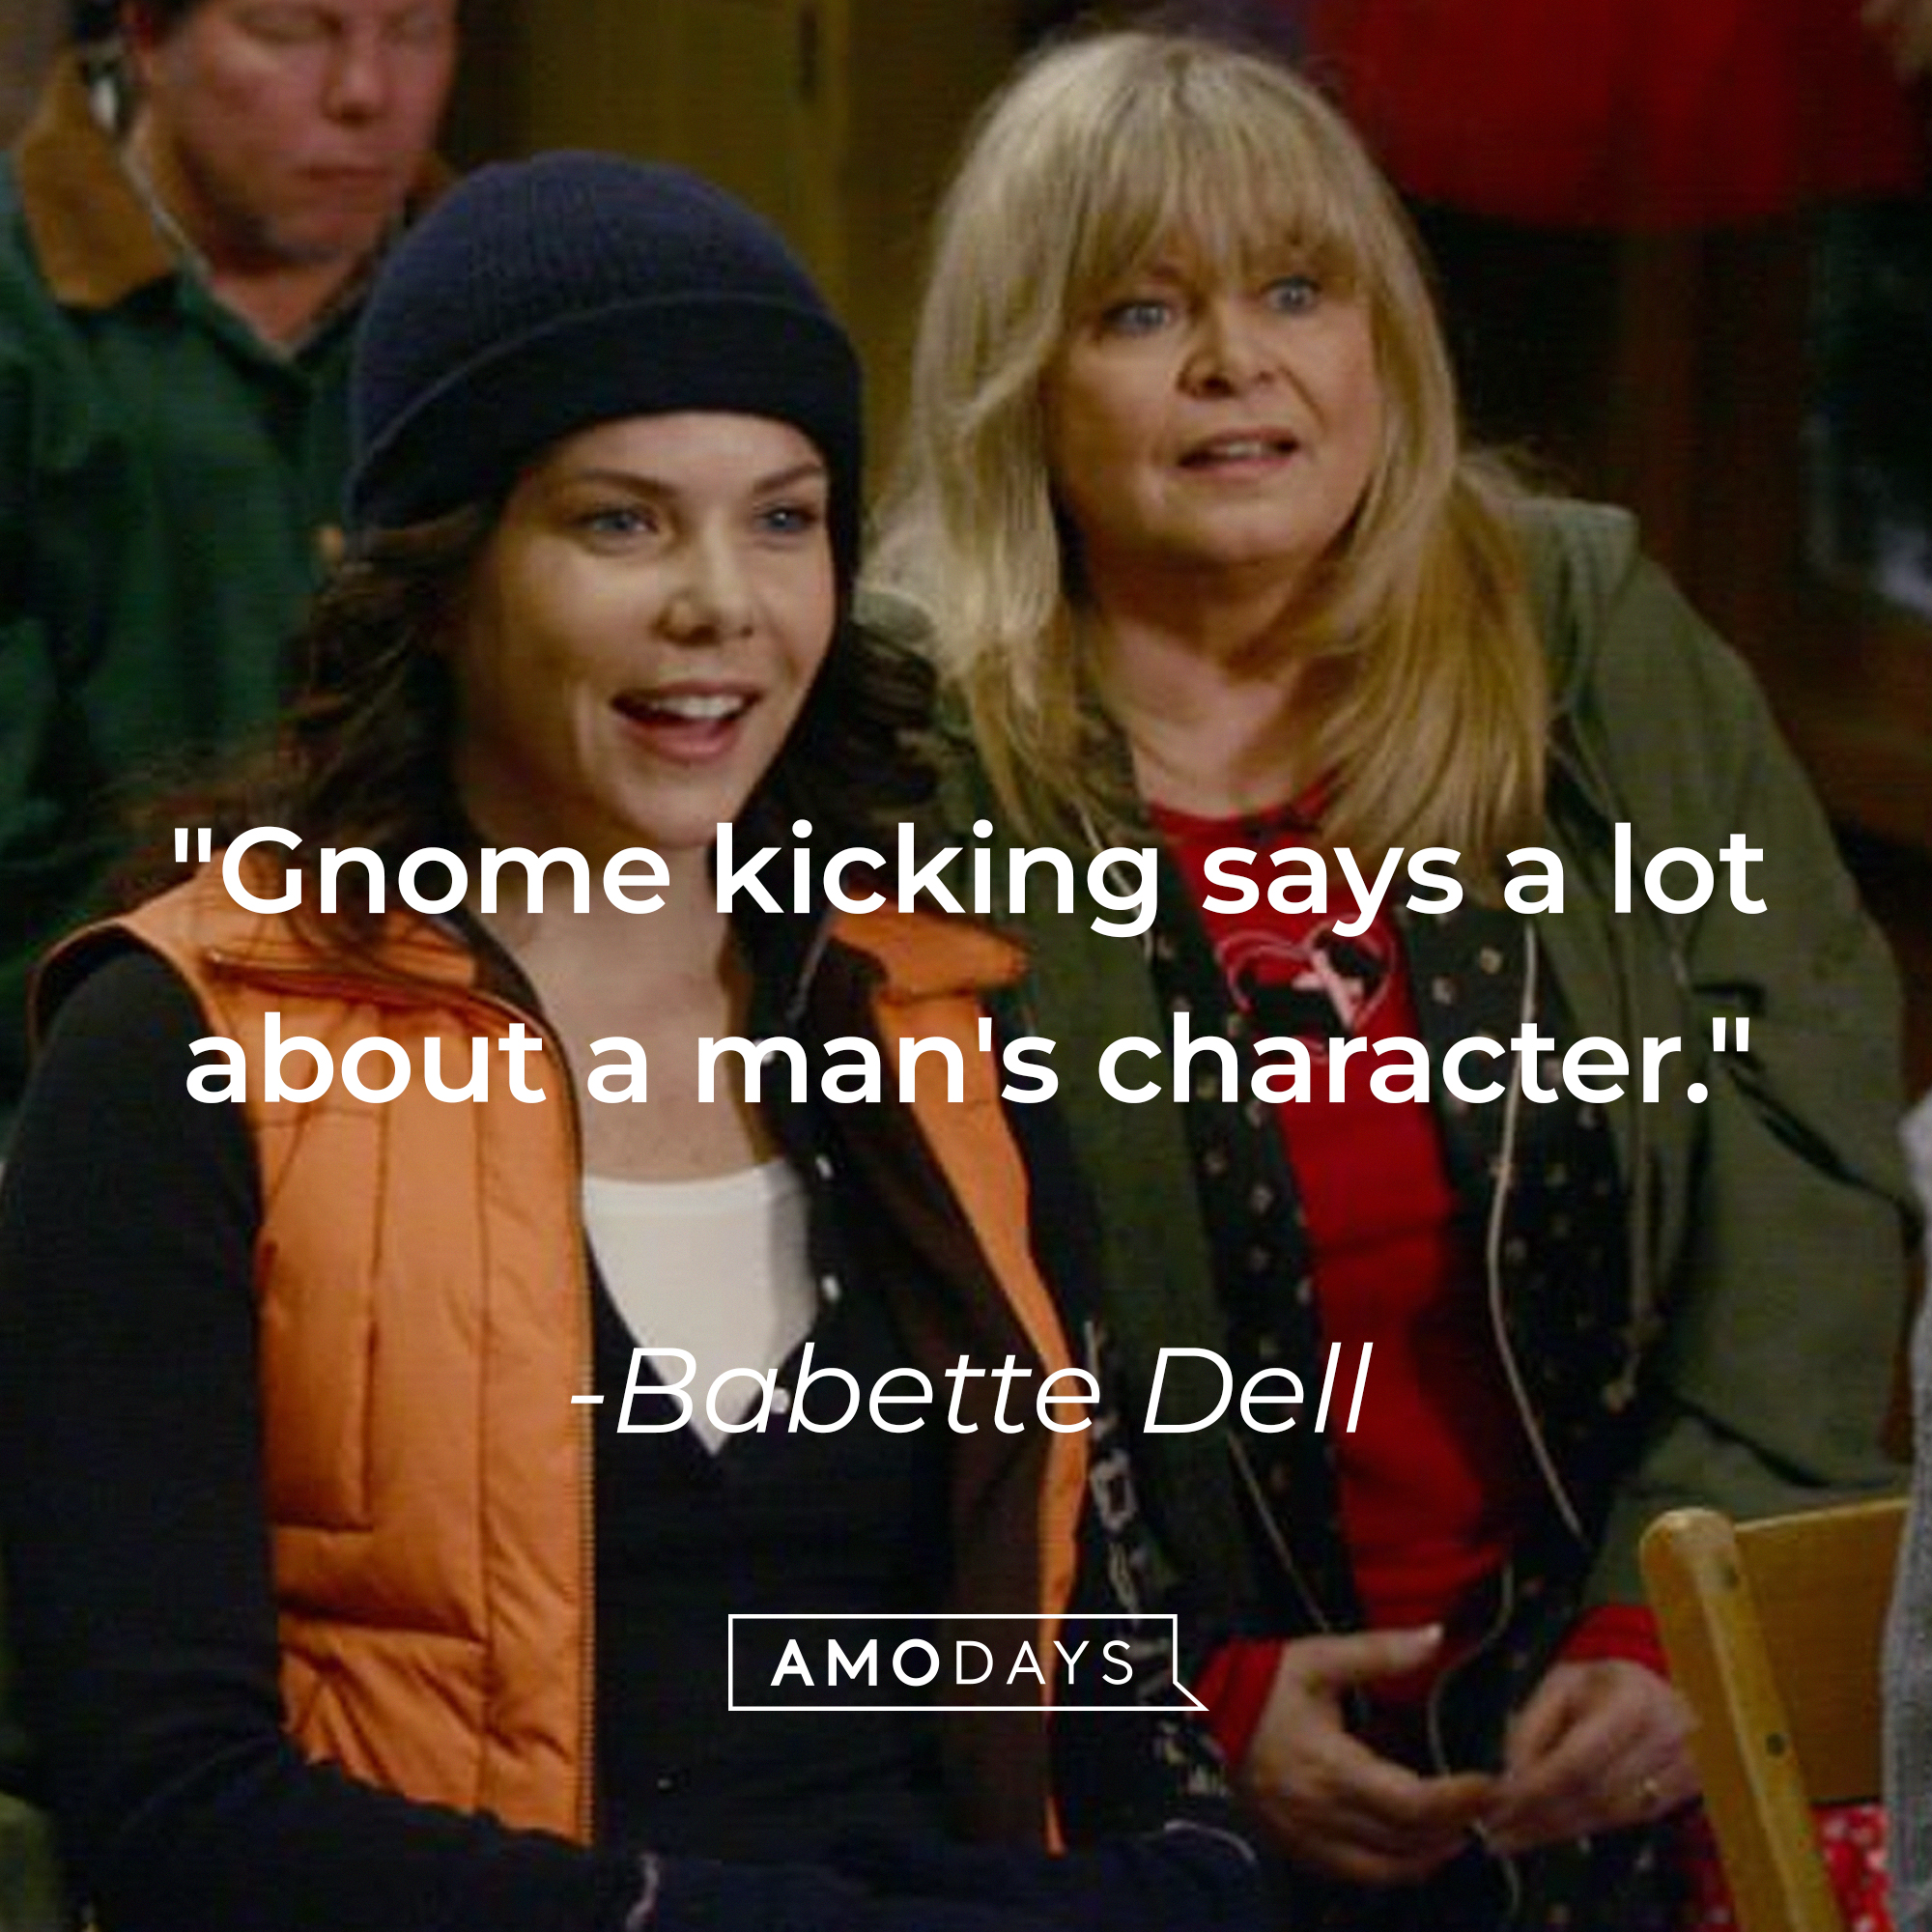 Babette Dell's quote: "Gnome kicking says a lot about a man's character." | Source: Facebook/GilmoreGirls